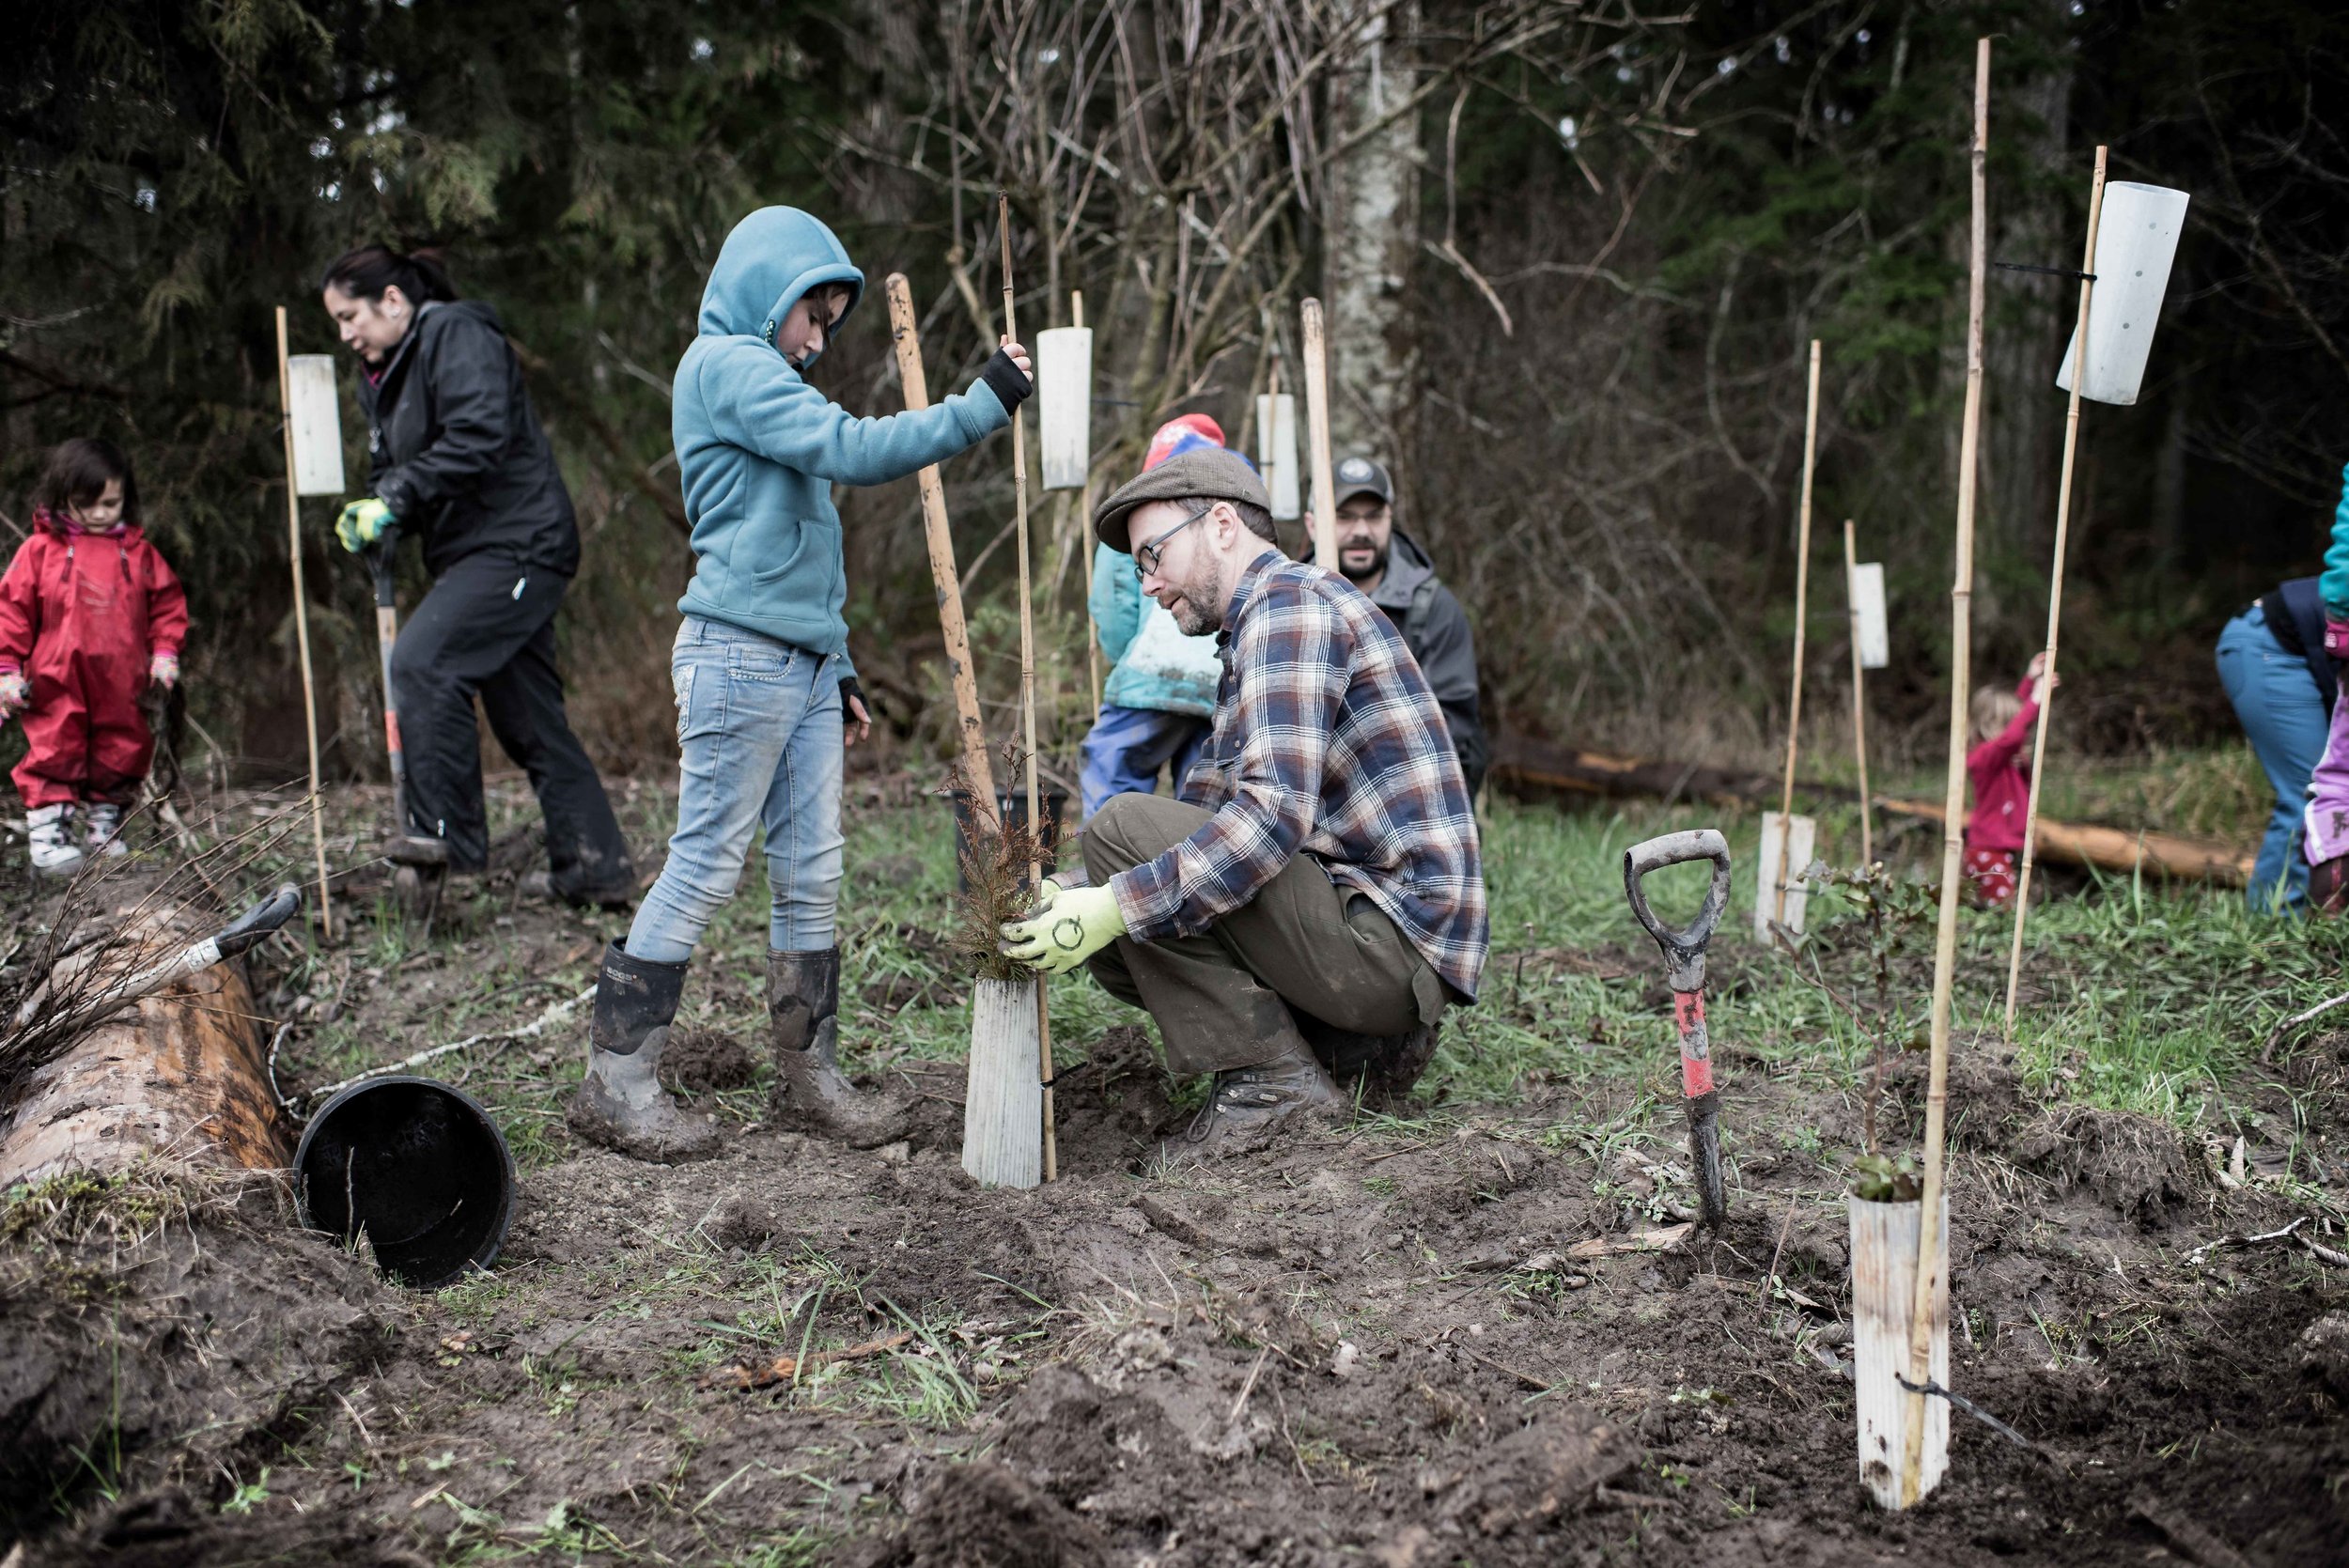 Justin Lake a teacher from Quilcene school plants trees with his daughter Photo_Credit_Eric Rabena.jpg